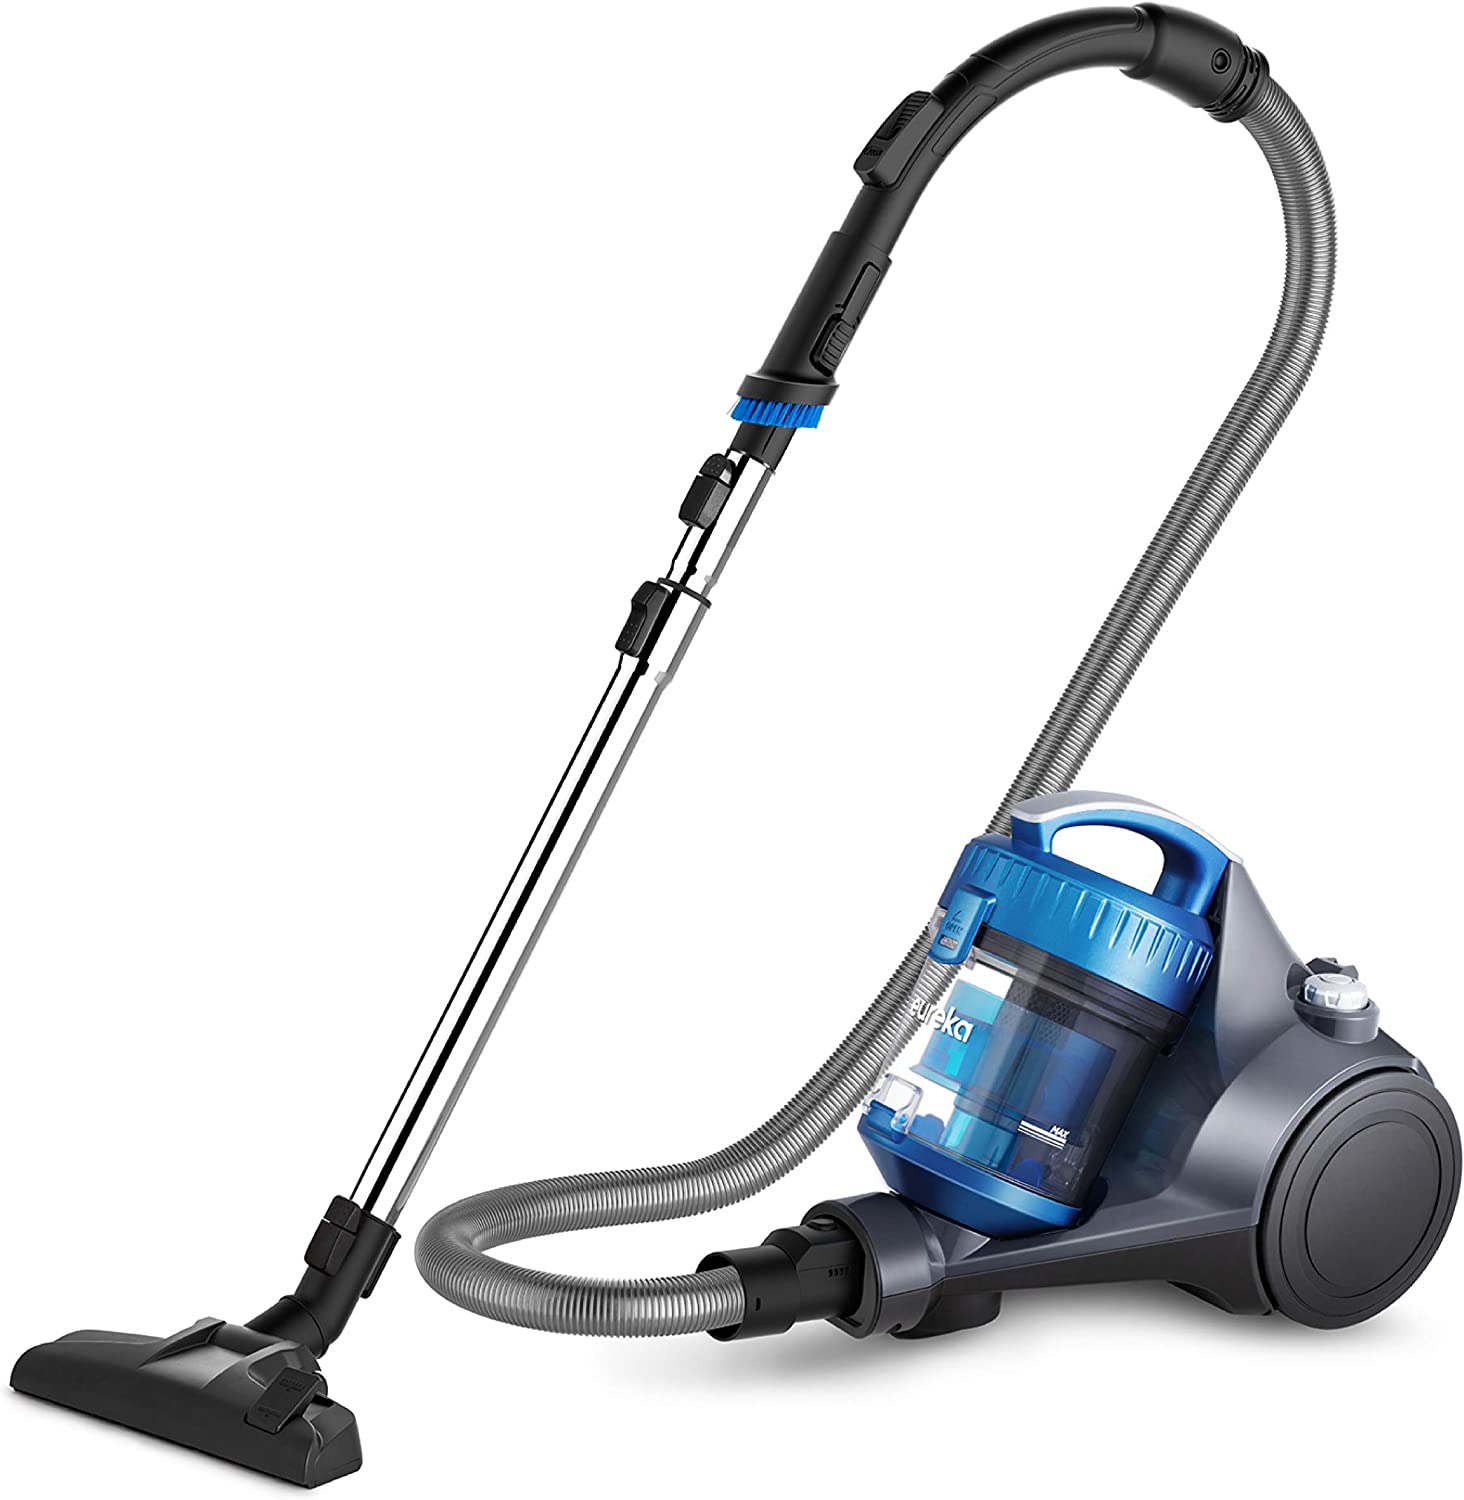 Eureka 3670M Canister Cleaner, Lightweight Powerful Vacuum for Carpets